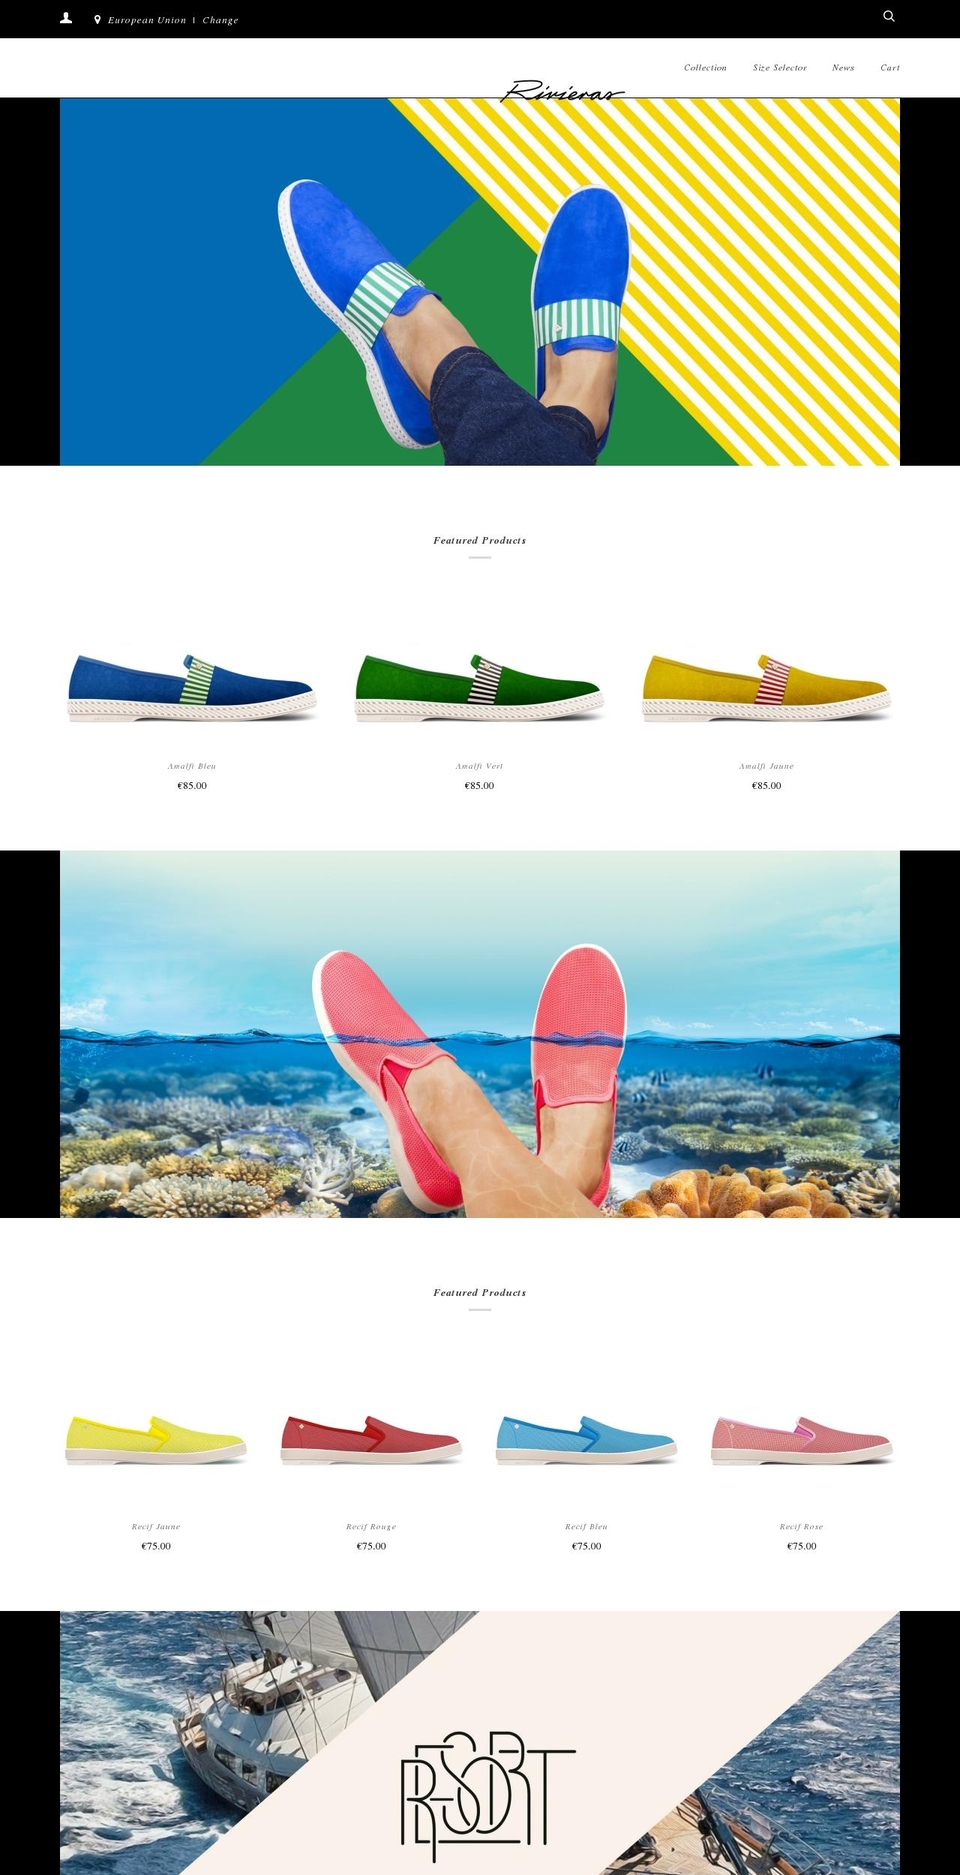 Rivieras [Plus]-TH-July-30-2018 Shopify theme site example rivieras-shoes.it